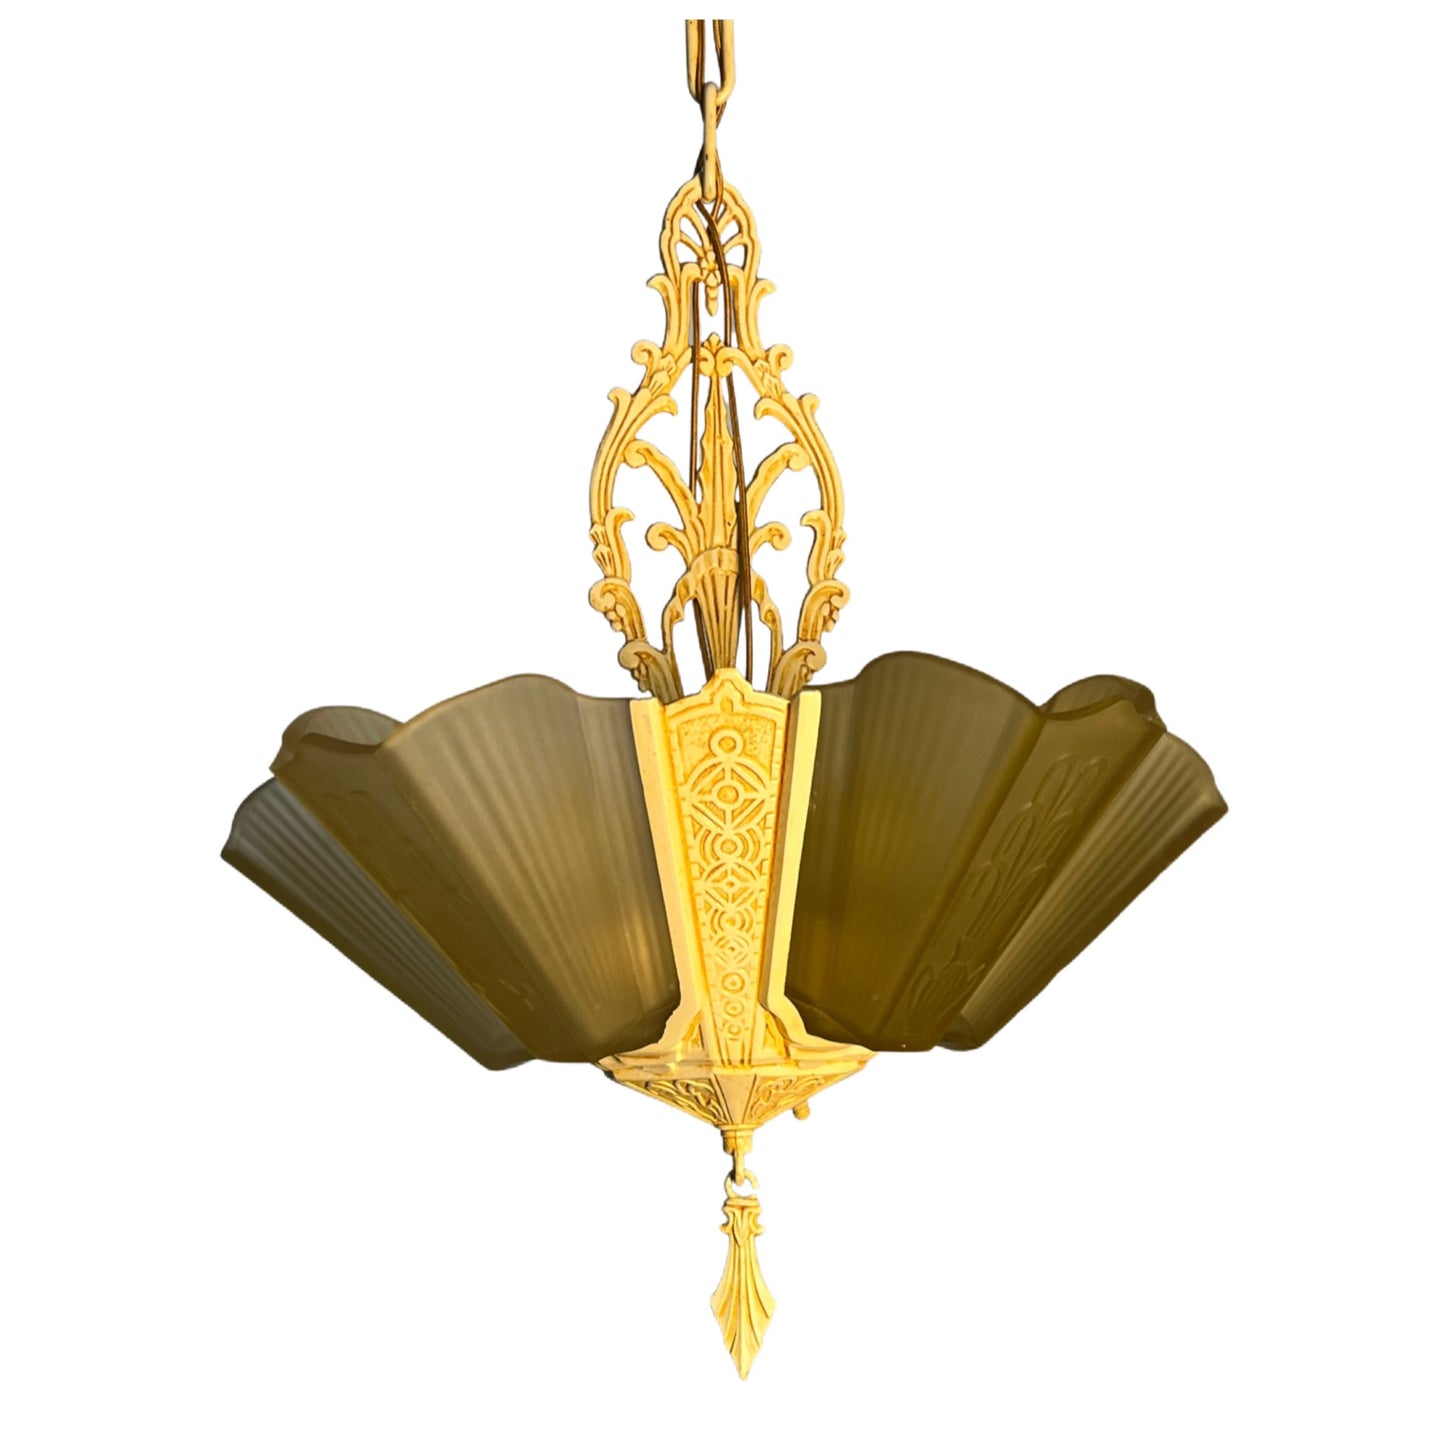 1930s chandelier  with Amber shades and Fountain Pattern